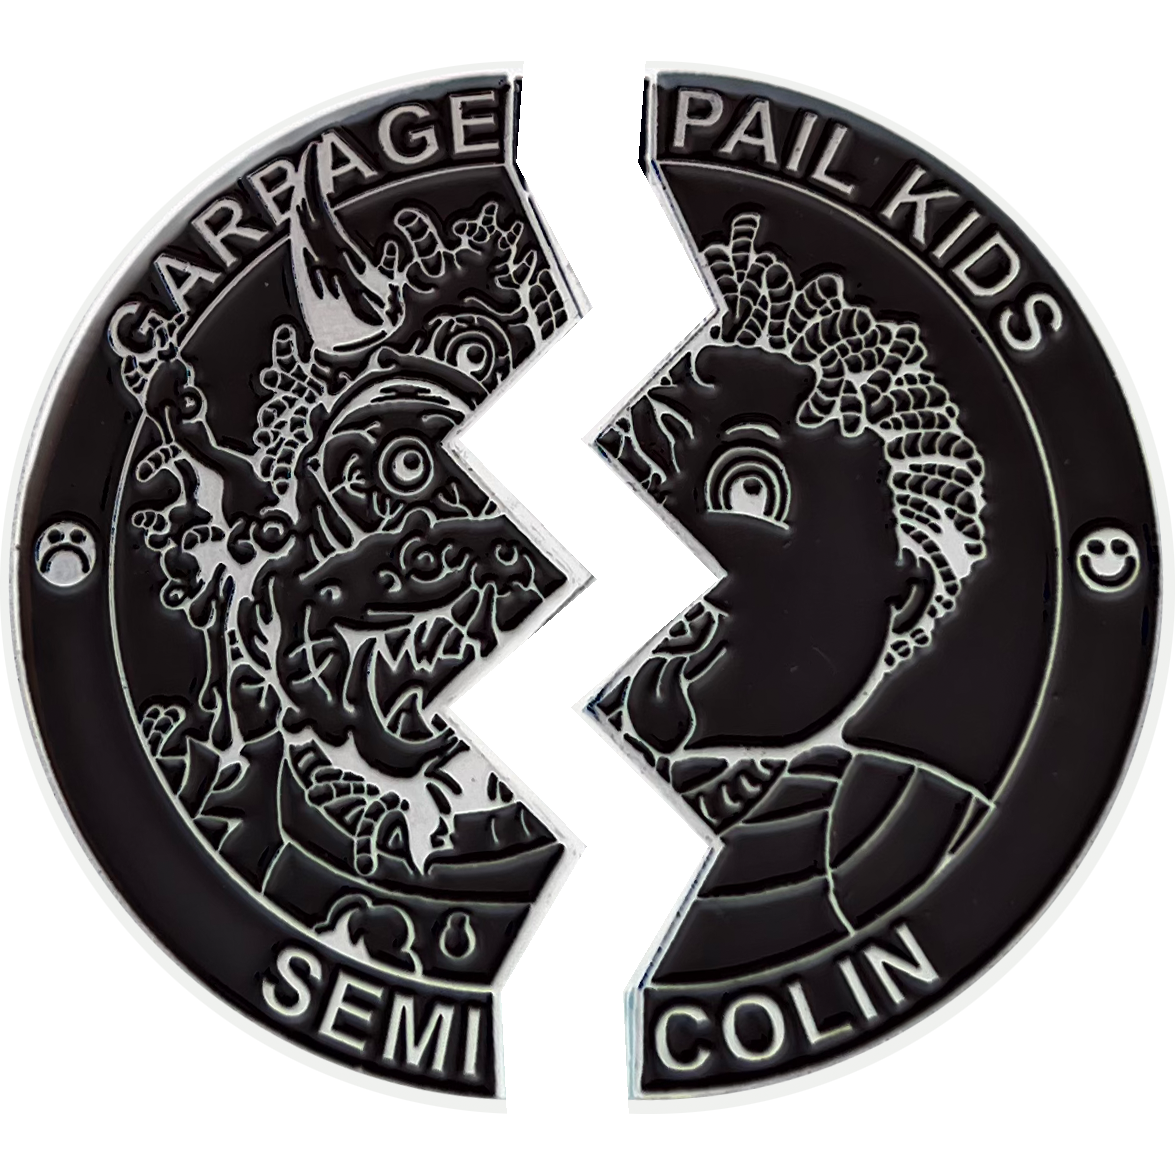 Black Color Proof Semi Colin 2 Coin set with free hard case